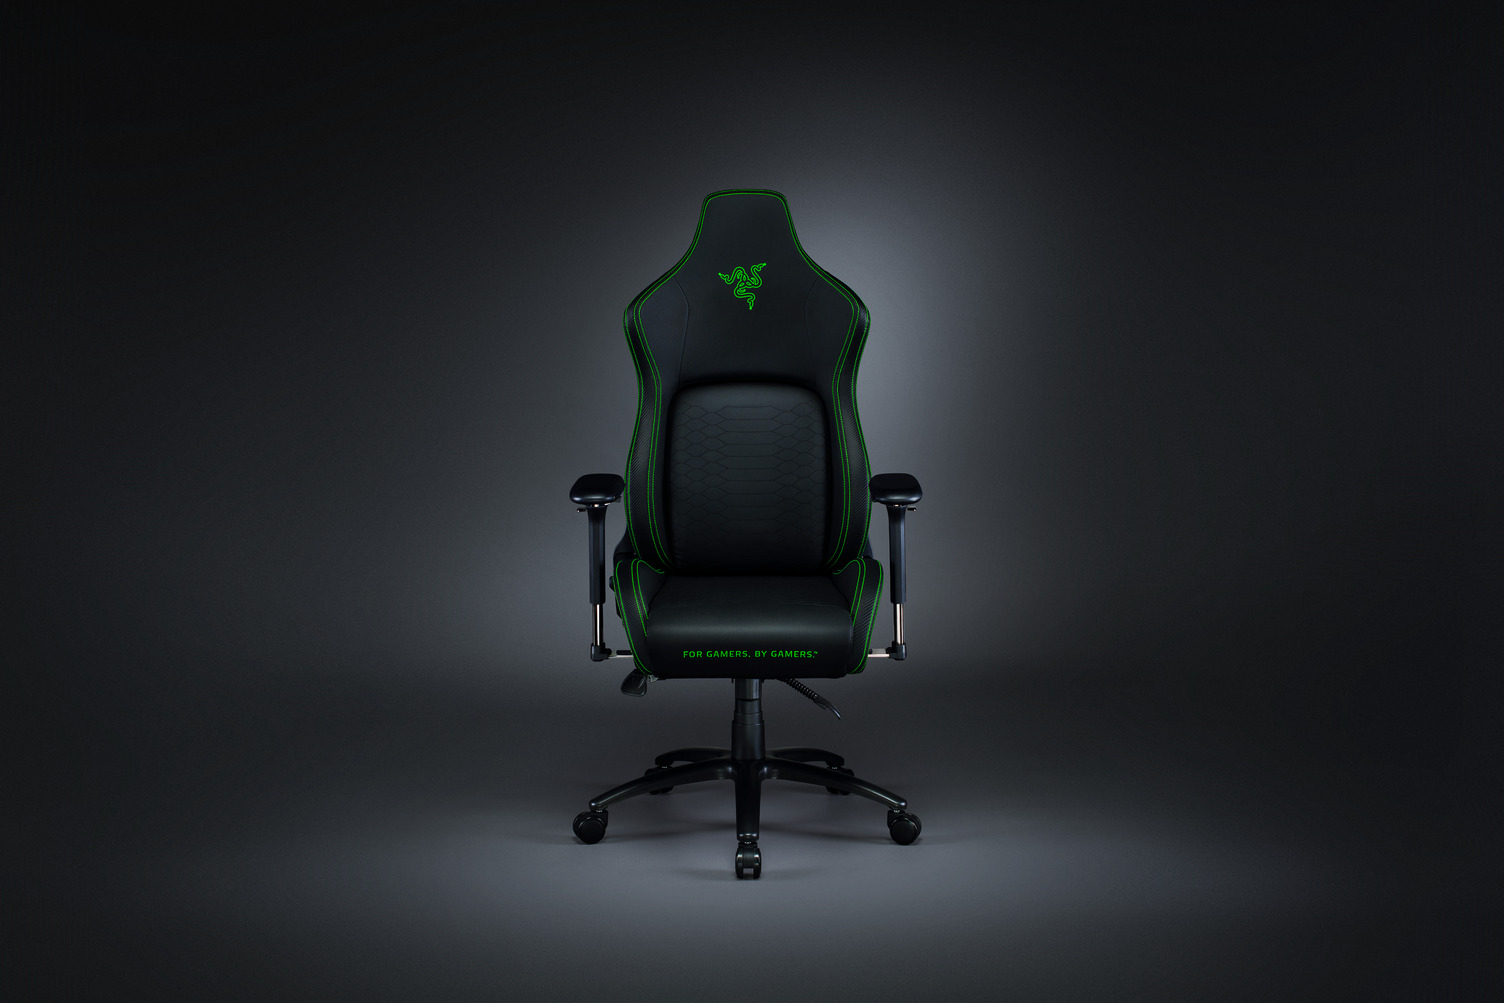 Rumbly Razer gaming chair pillow could add Hypersense to any seat